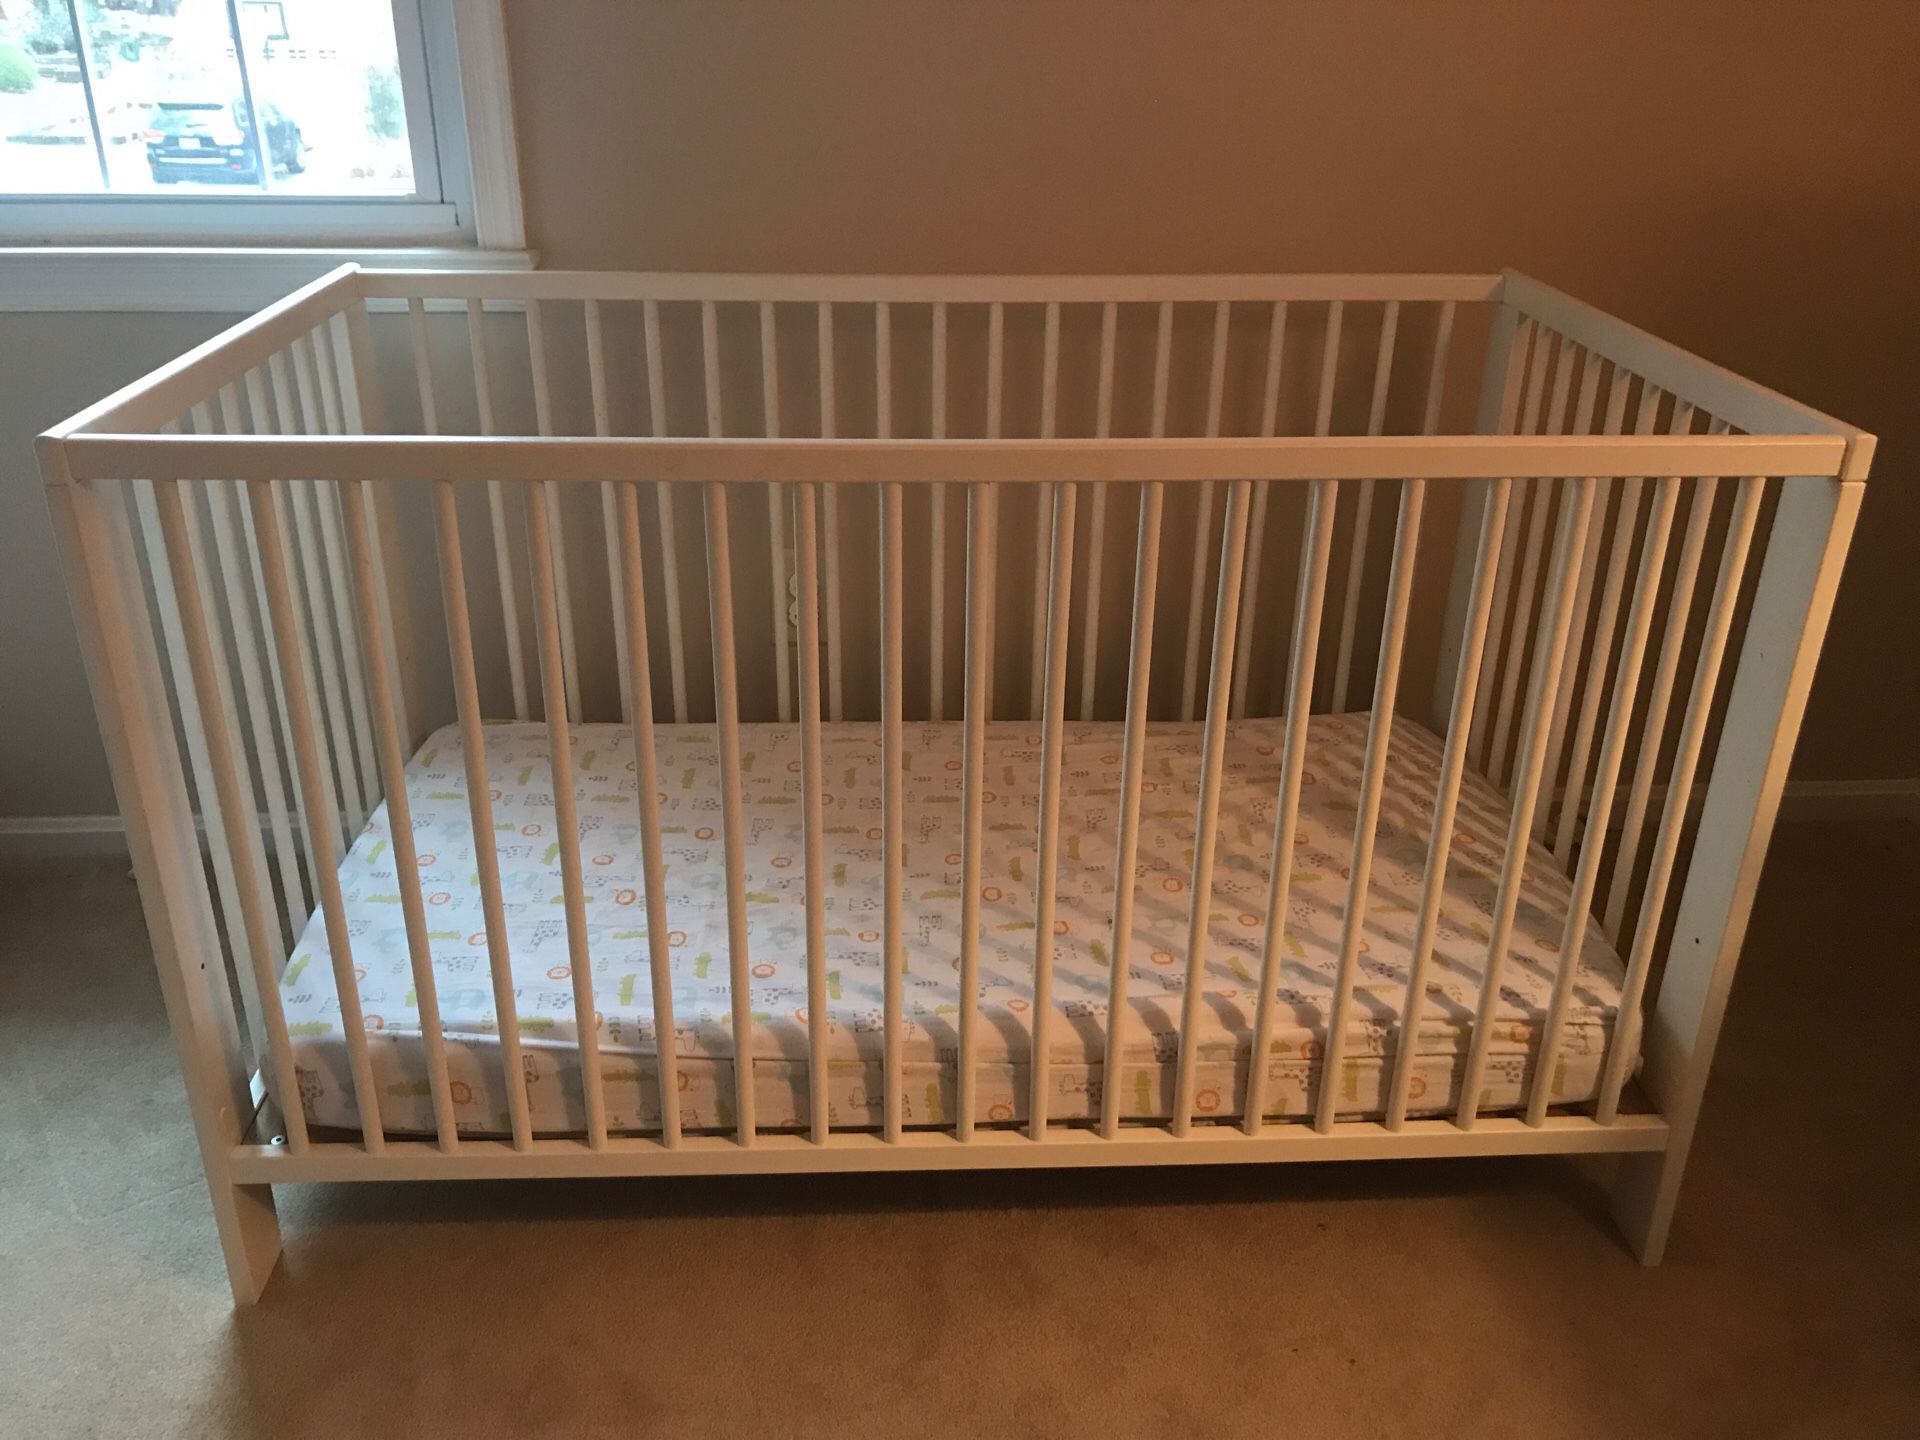 IKEA GULLIVER Crib or Toddler Bed in White